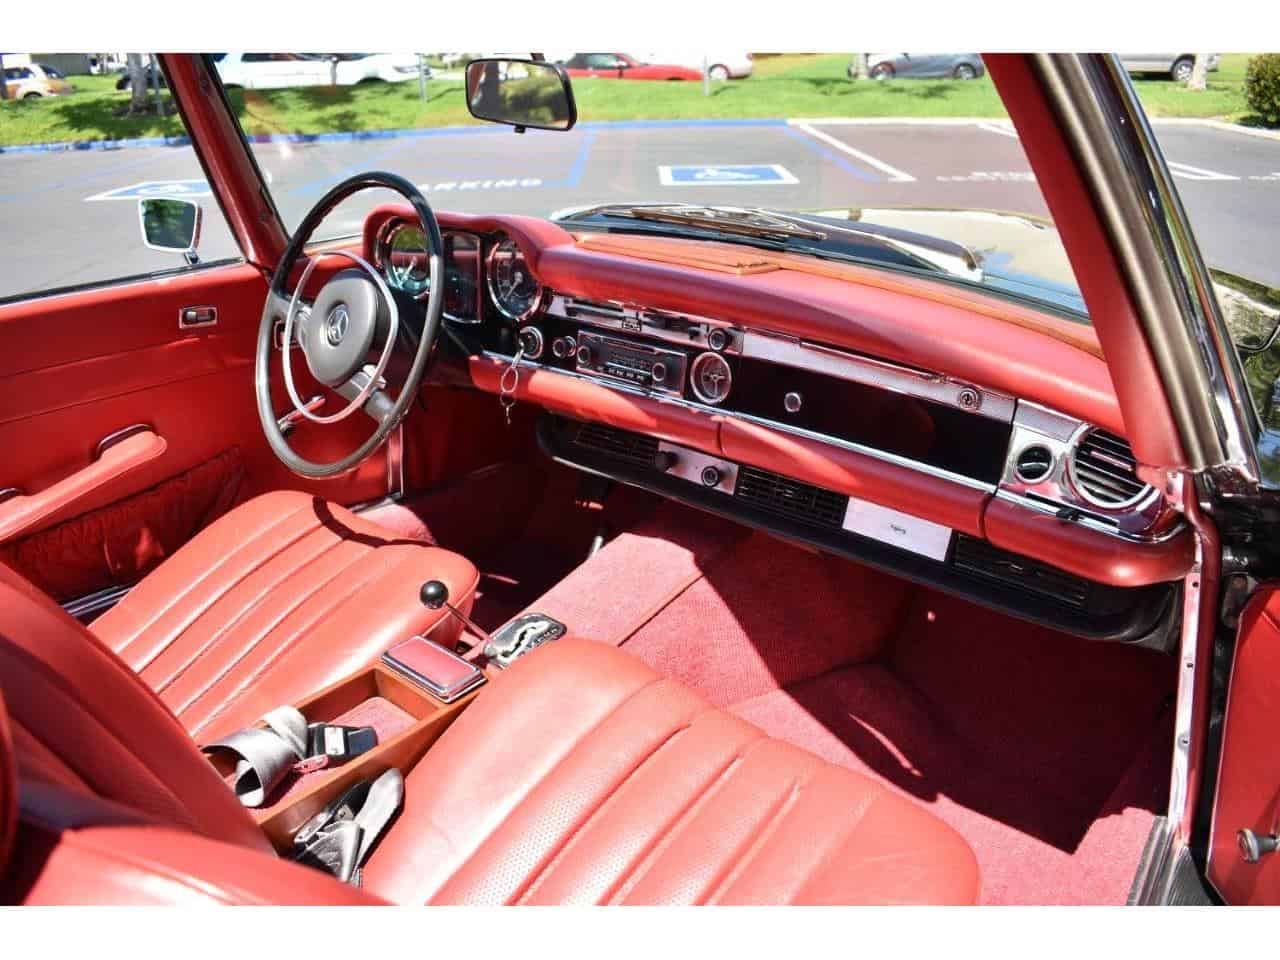 Mercedes Benz 280SL, Cars keep jarring more memories… The lost weekend at Elkhart, ClassicCars.com Journal